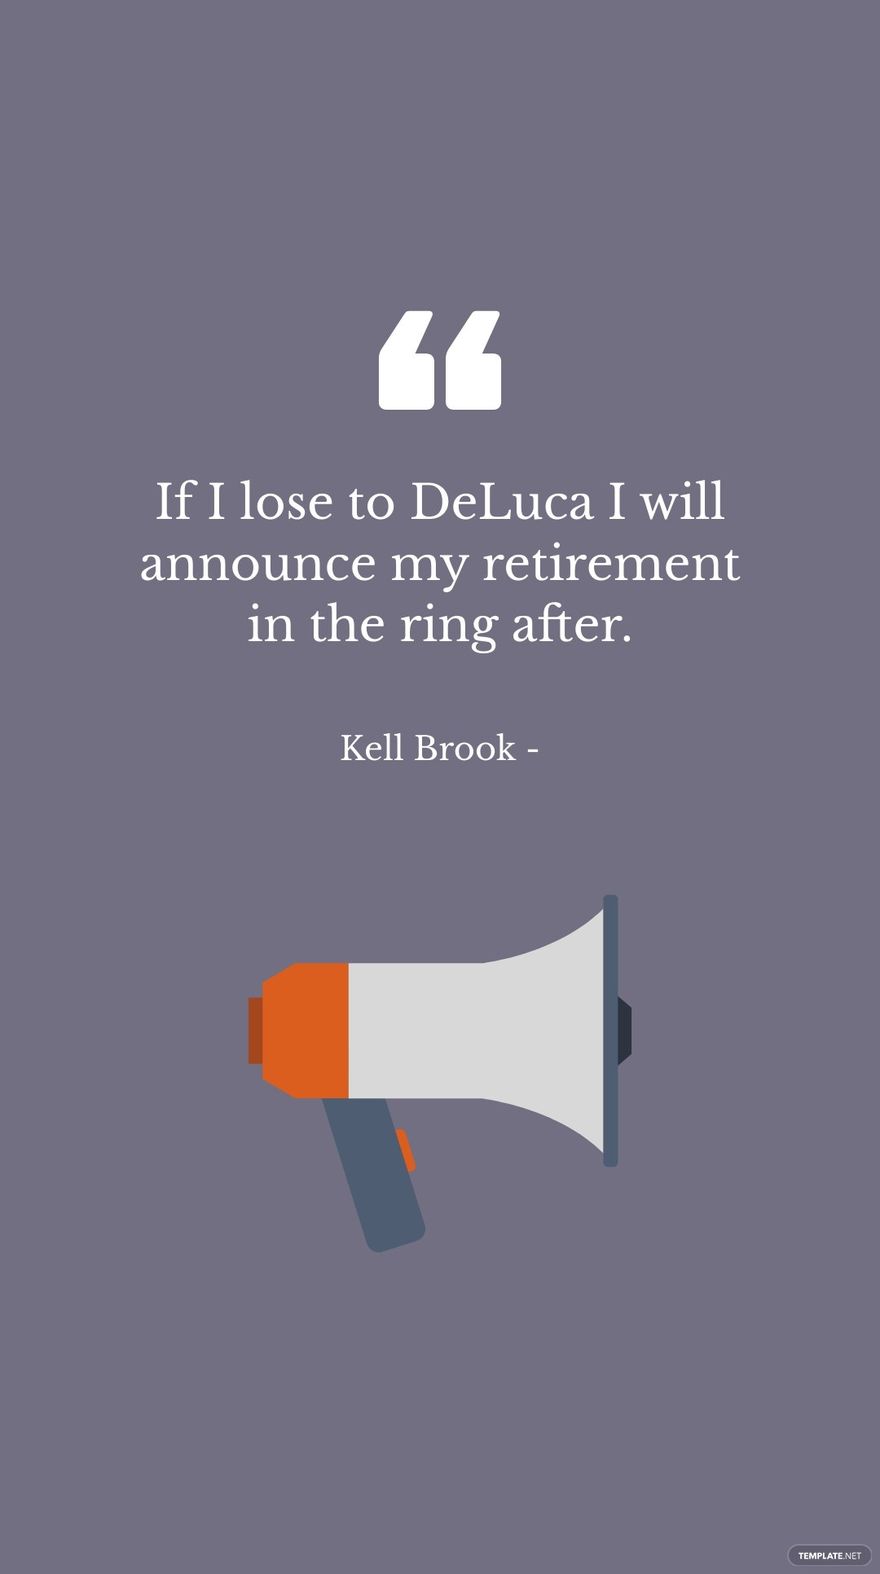 Free Kell Brook - If I lose to DeLuca I will announce my retirement in the ring after. in JPG